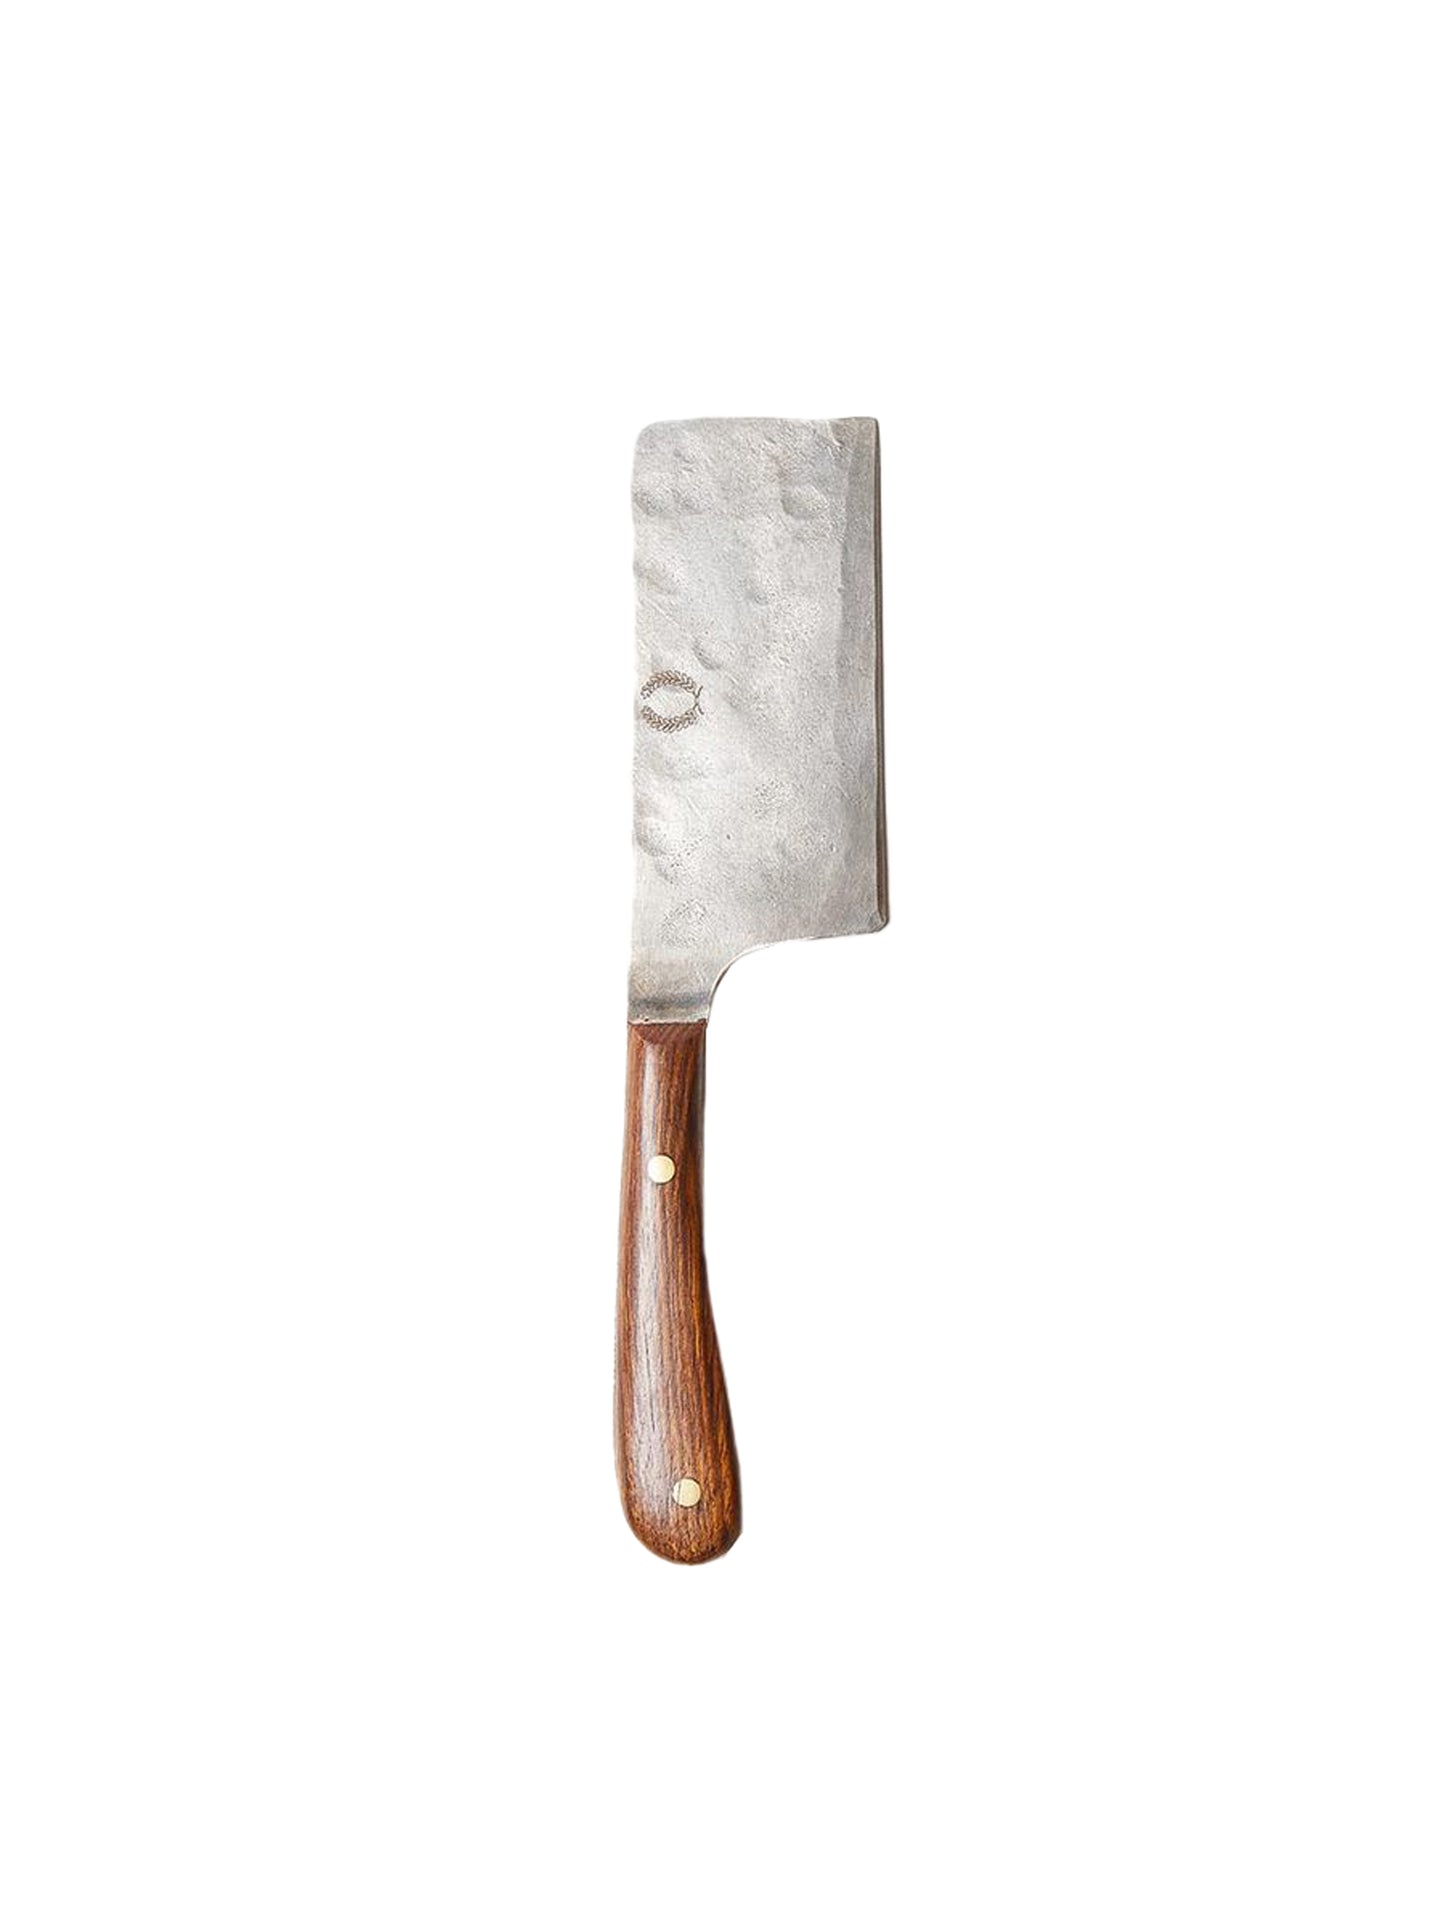 Shop the Farmhouse Pottery Artisan Forged Cheese Knives at Weston